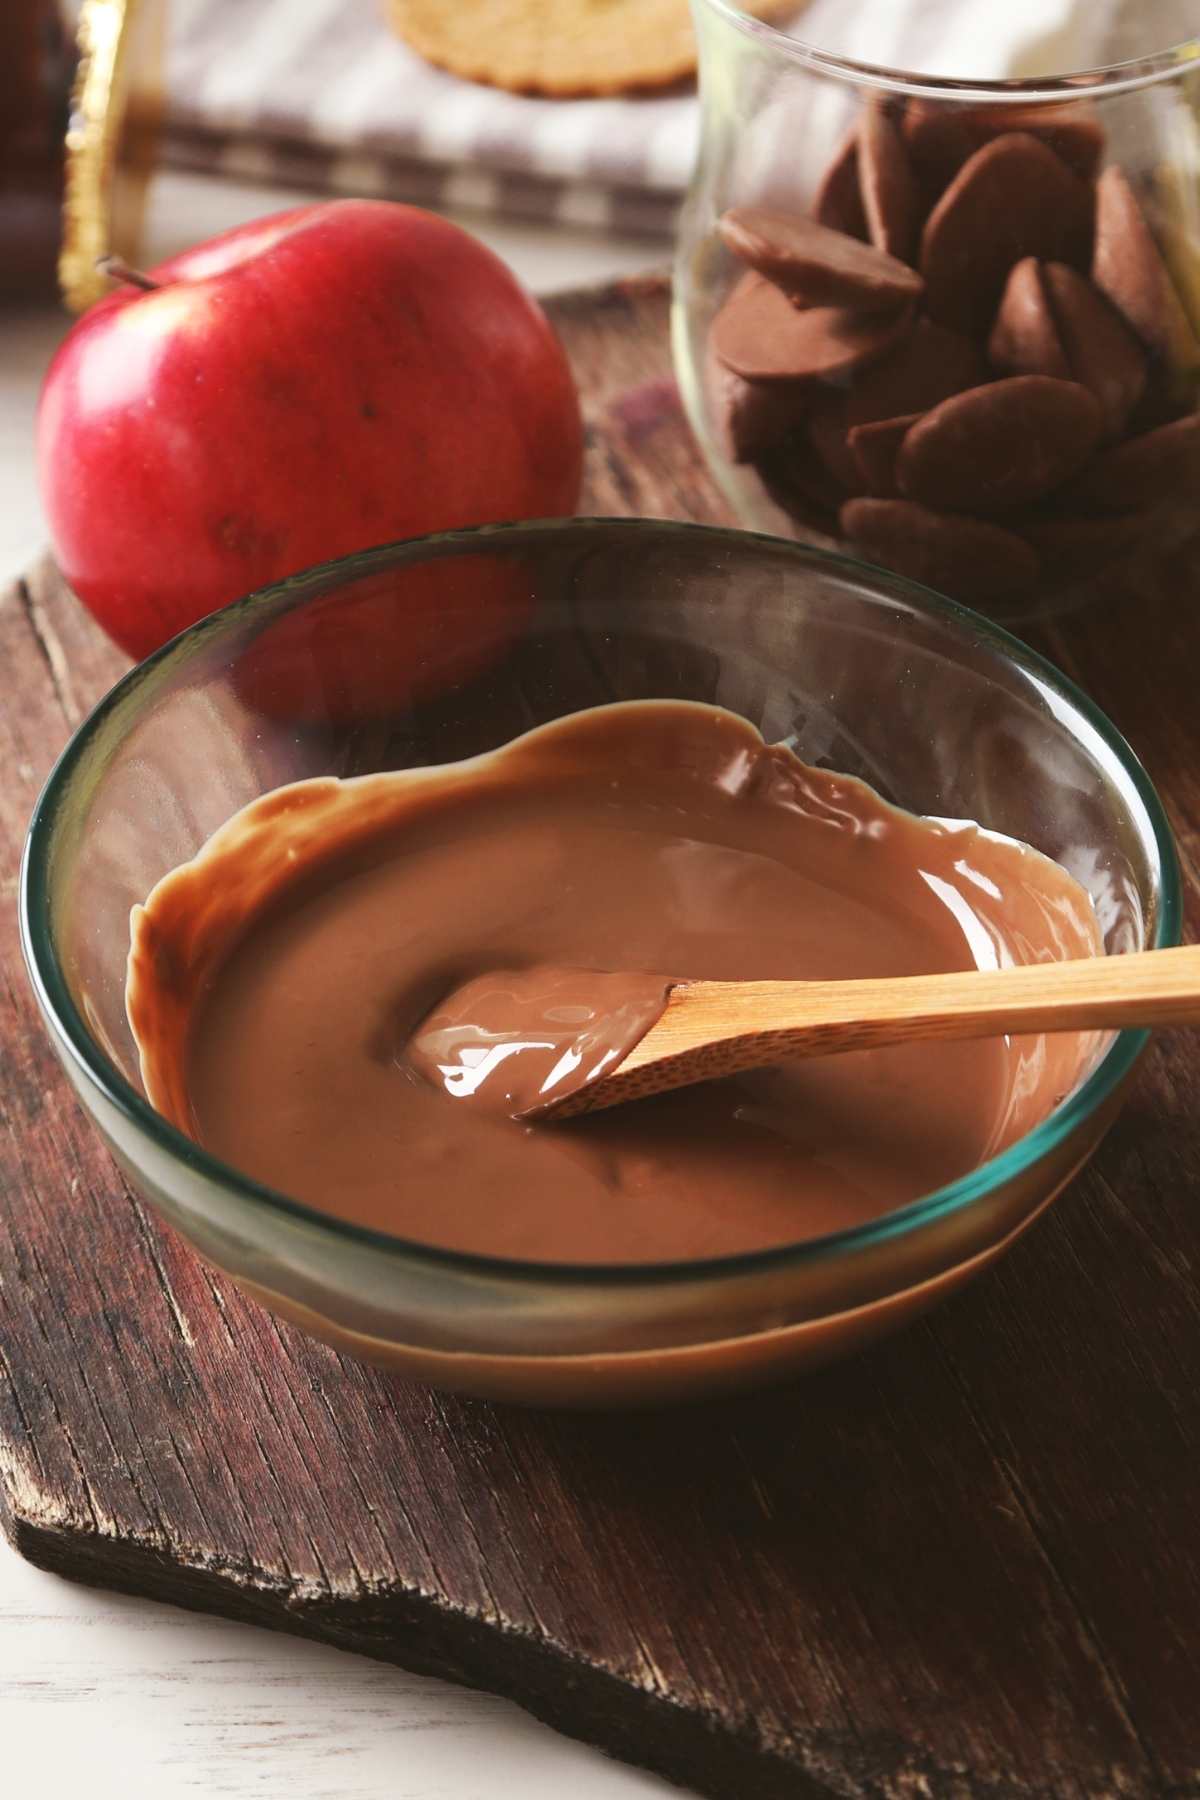 Melting chocolate for baking or making other desserts is a simple and satisfying process. It can be tricky to melt chocolate just right. No matter what type of chocolate you’re using, here are our best tips for melting it perfectly every time.